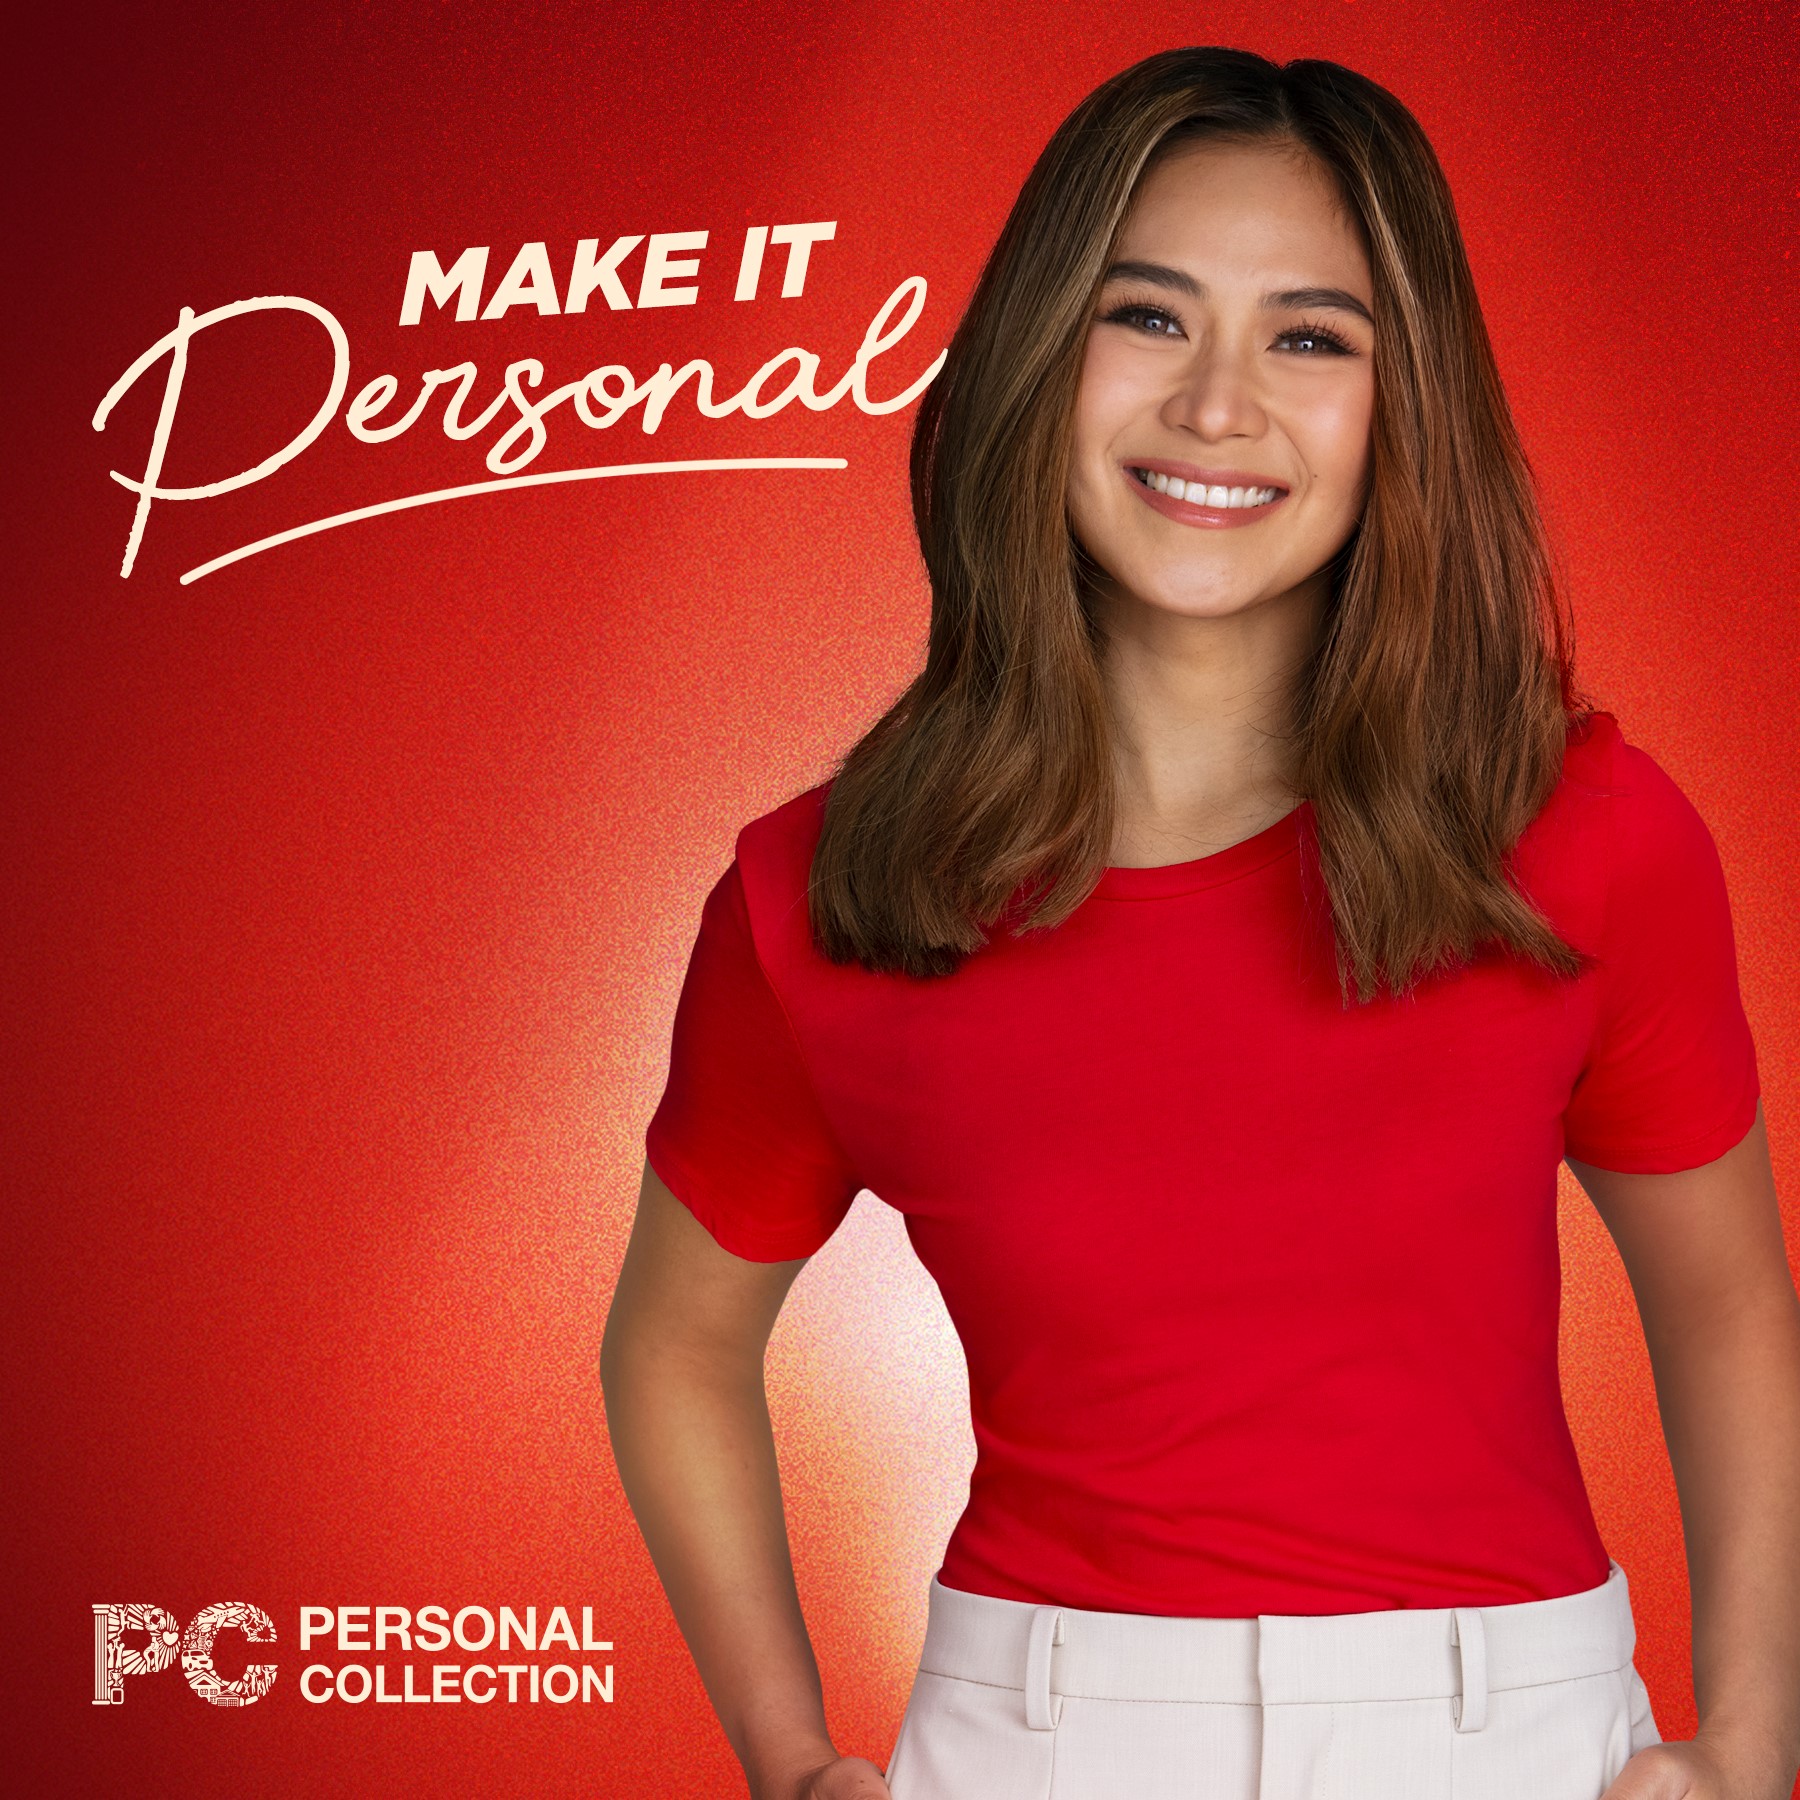 Sarah Geronimo is Personal Collection’s New Ambassador for Championing the Great Life in the Philippines